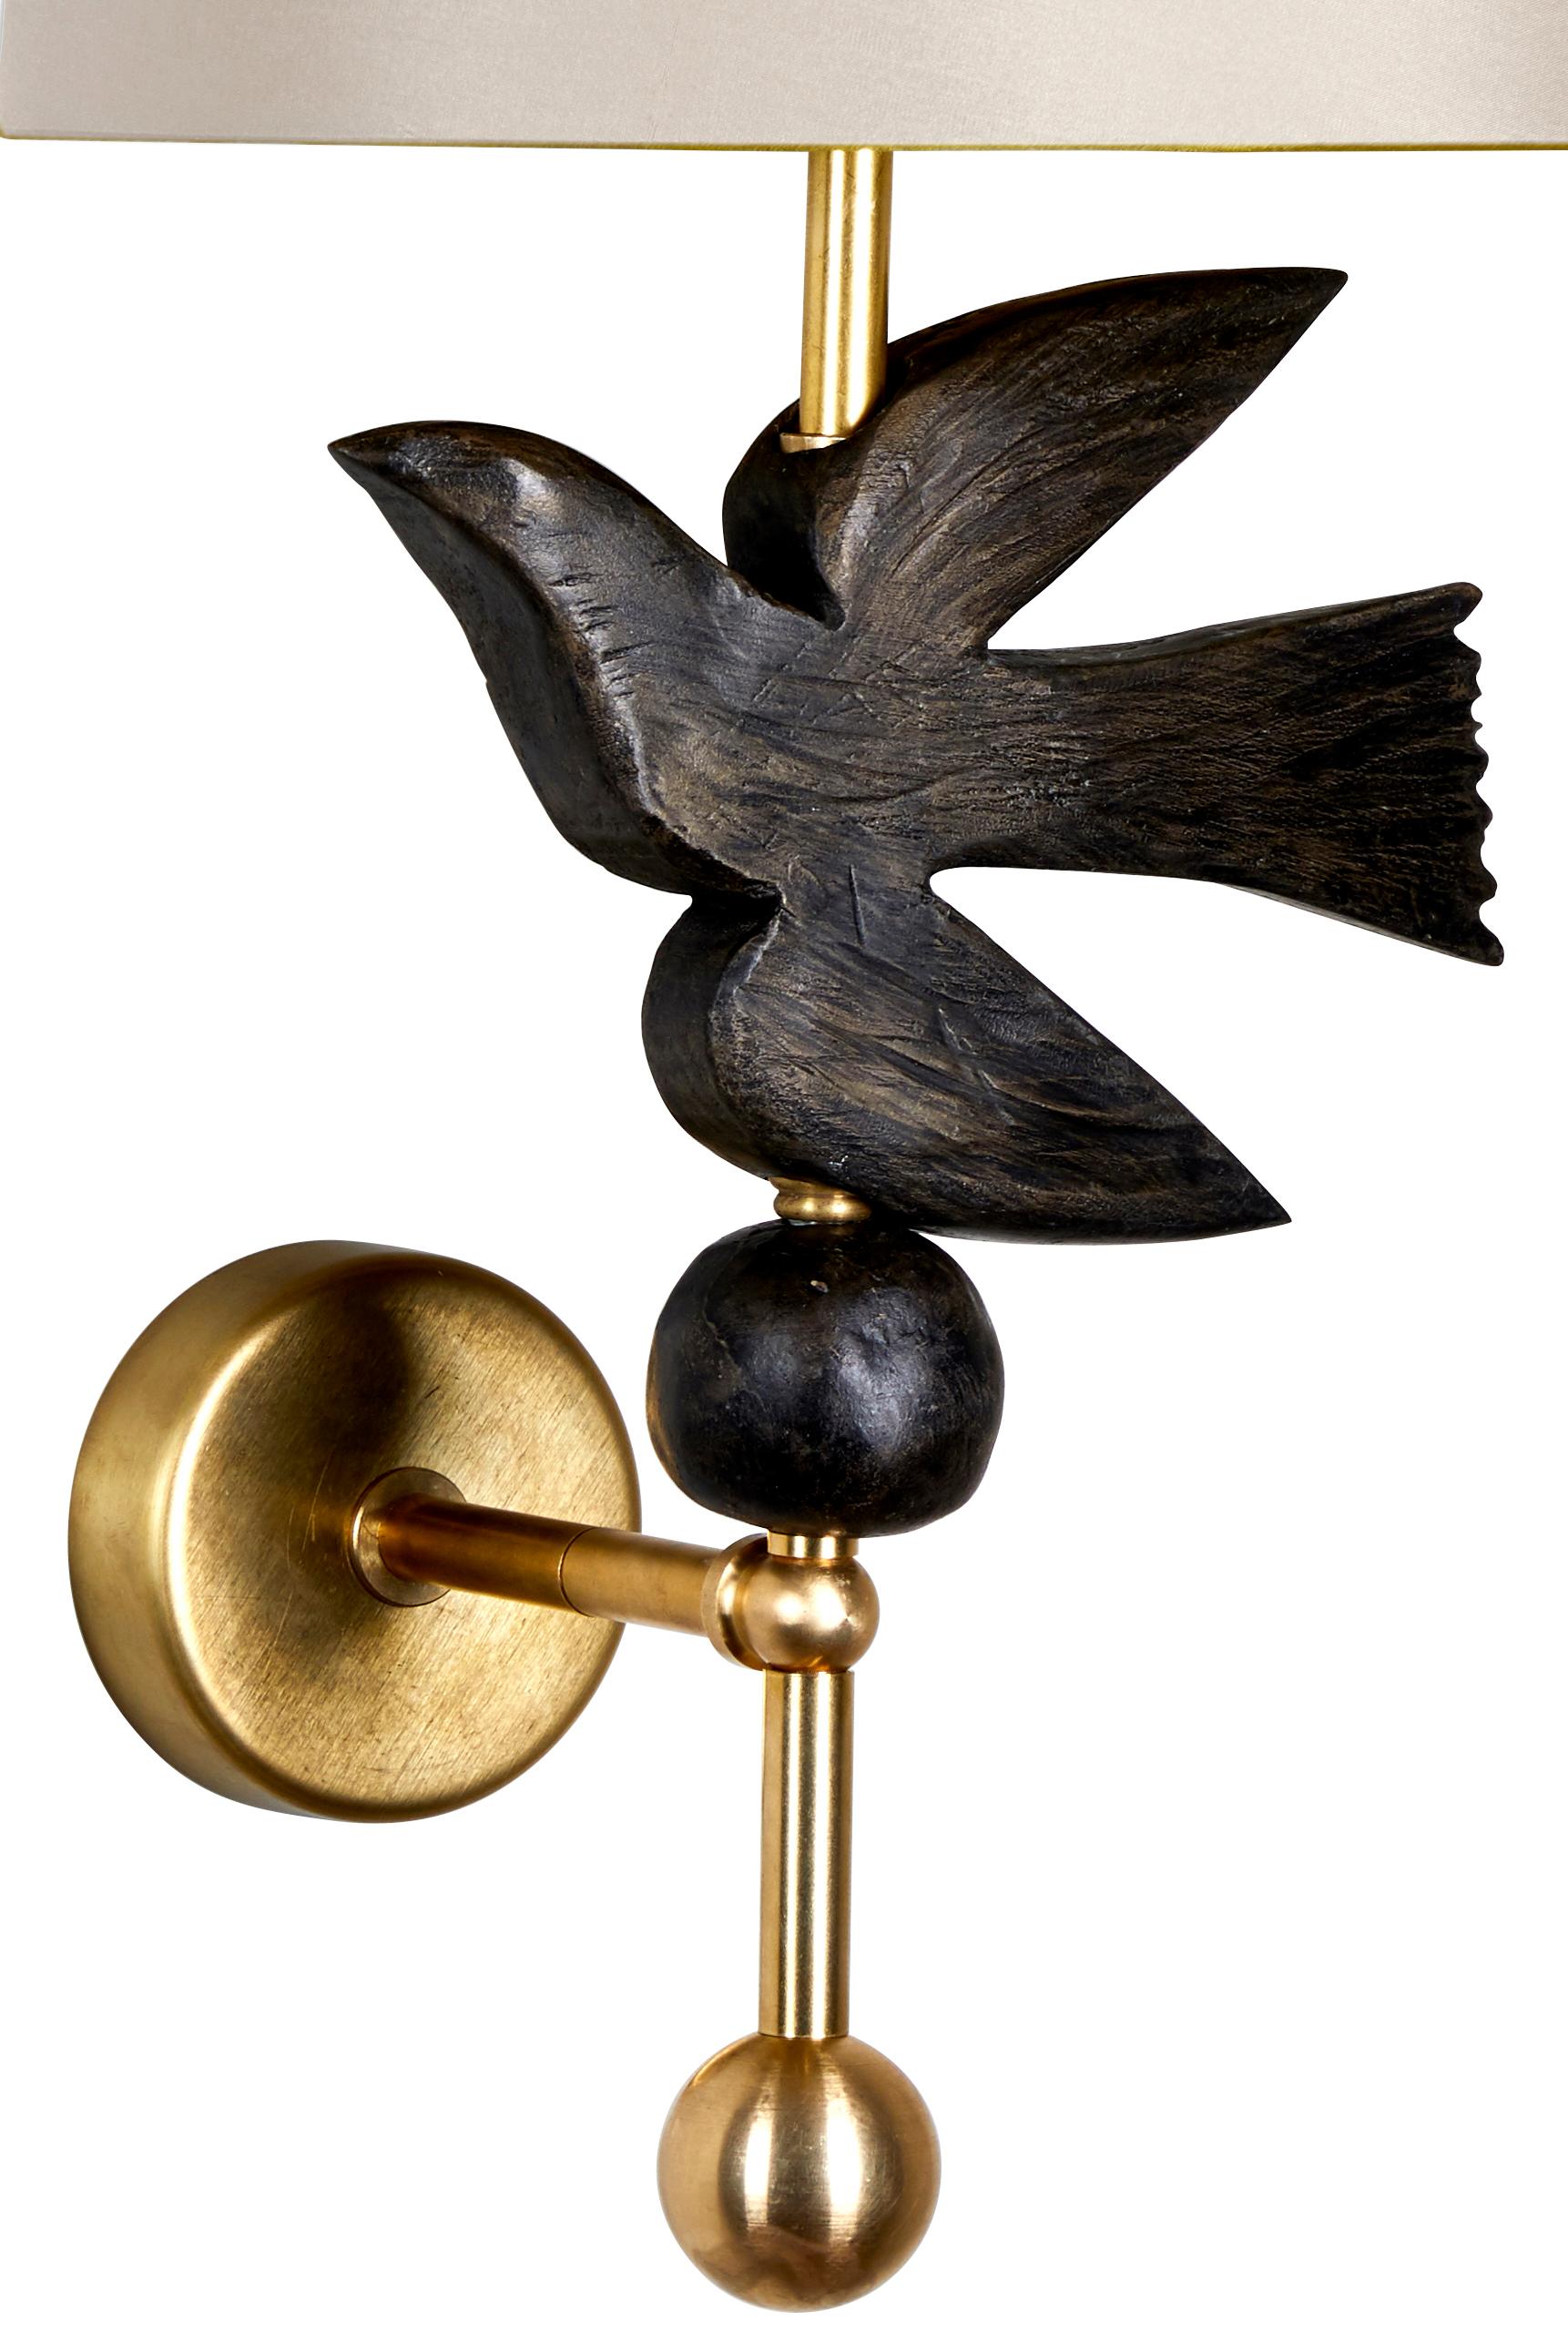 This Margit Wittig wall light (sconce) which features a bronze-resin pearl sitting below a hand-sculpted resin bird in flight cast in her London-based studio. The detail elements are hand-finished with a hint of gold patina to enhance the organic